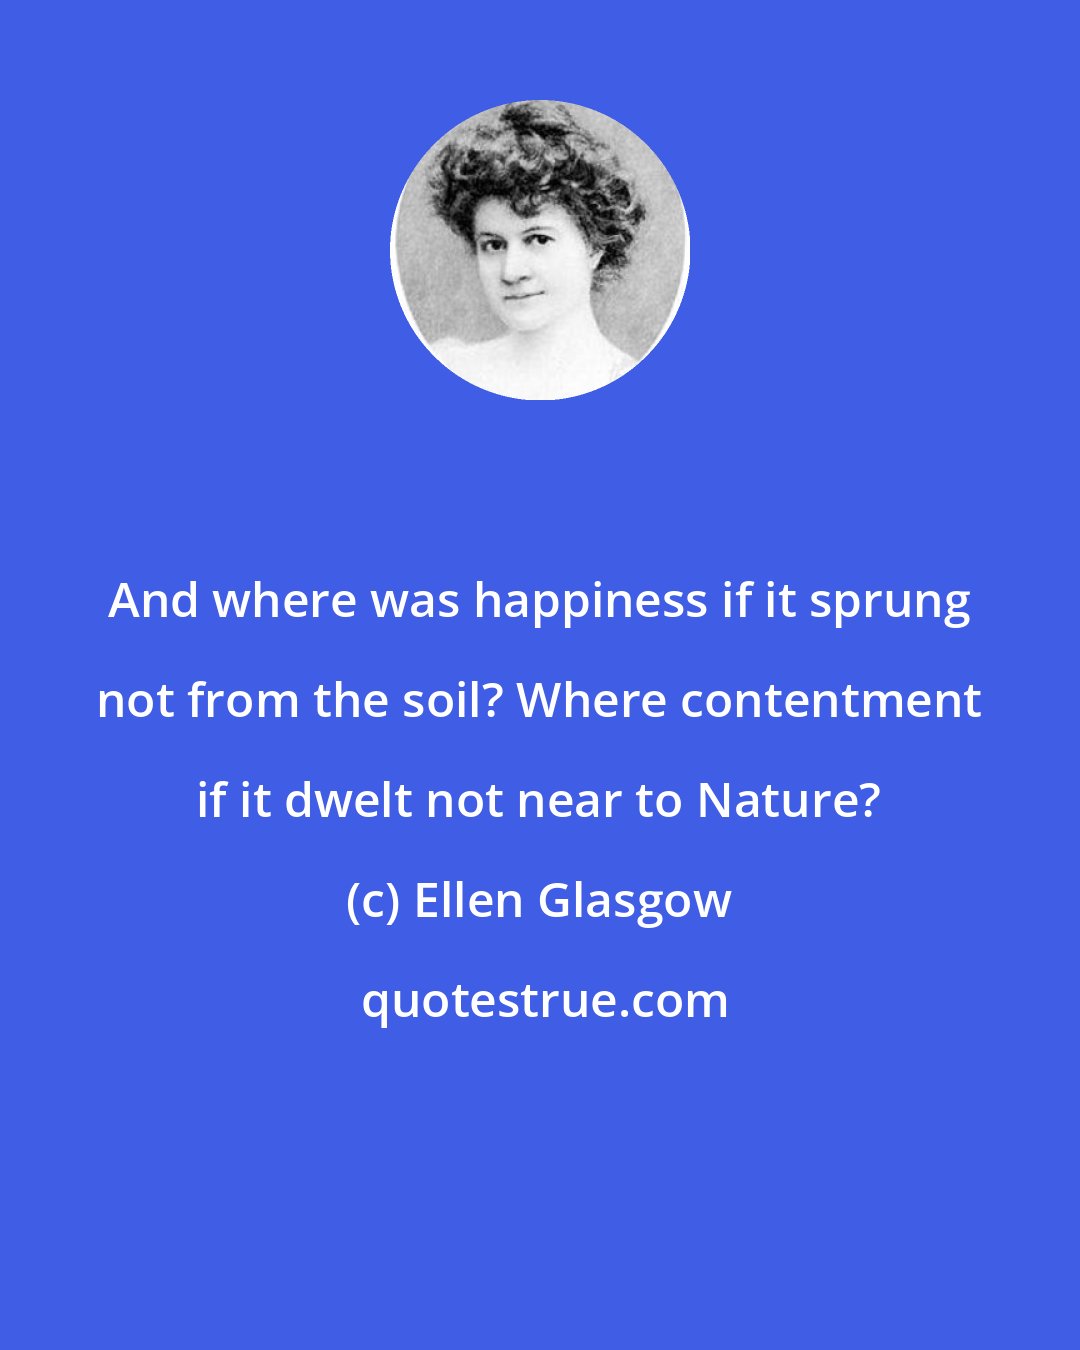 Ellen Glasgow: And where was happiness if it sprung not from the soil? Where contentment if it dwelt not near to Nature?